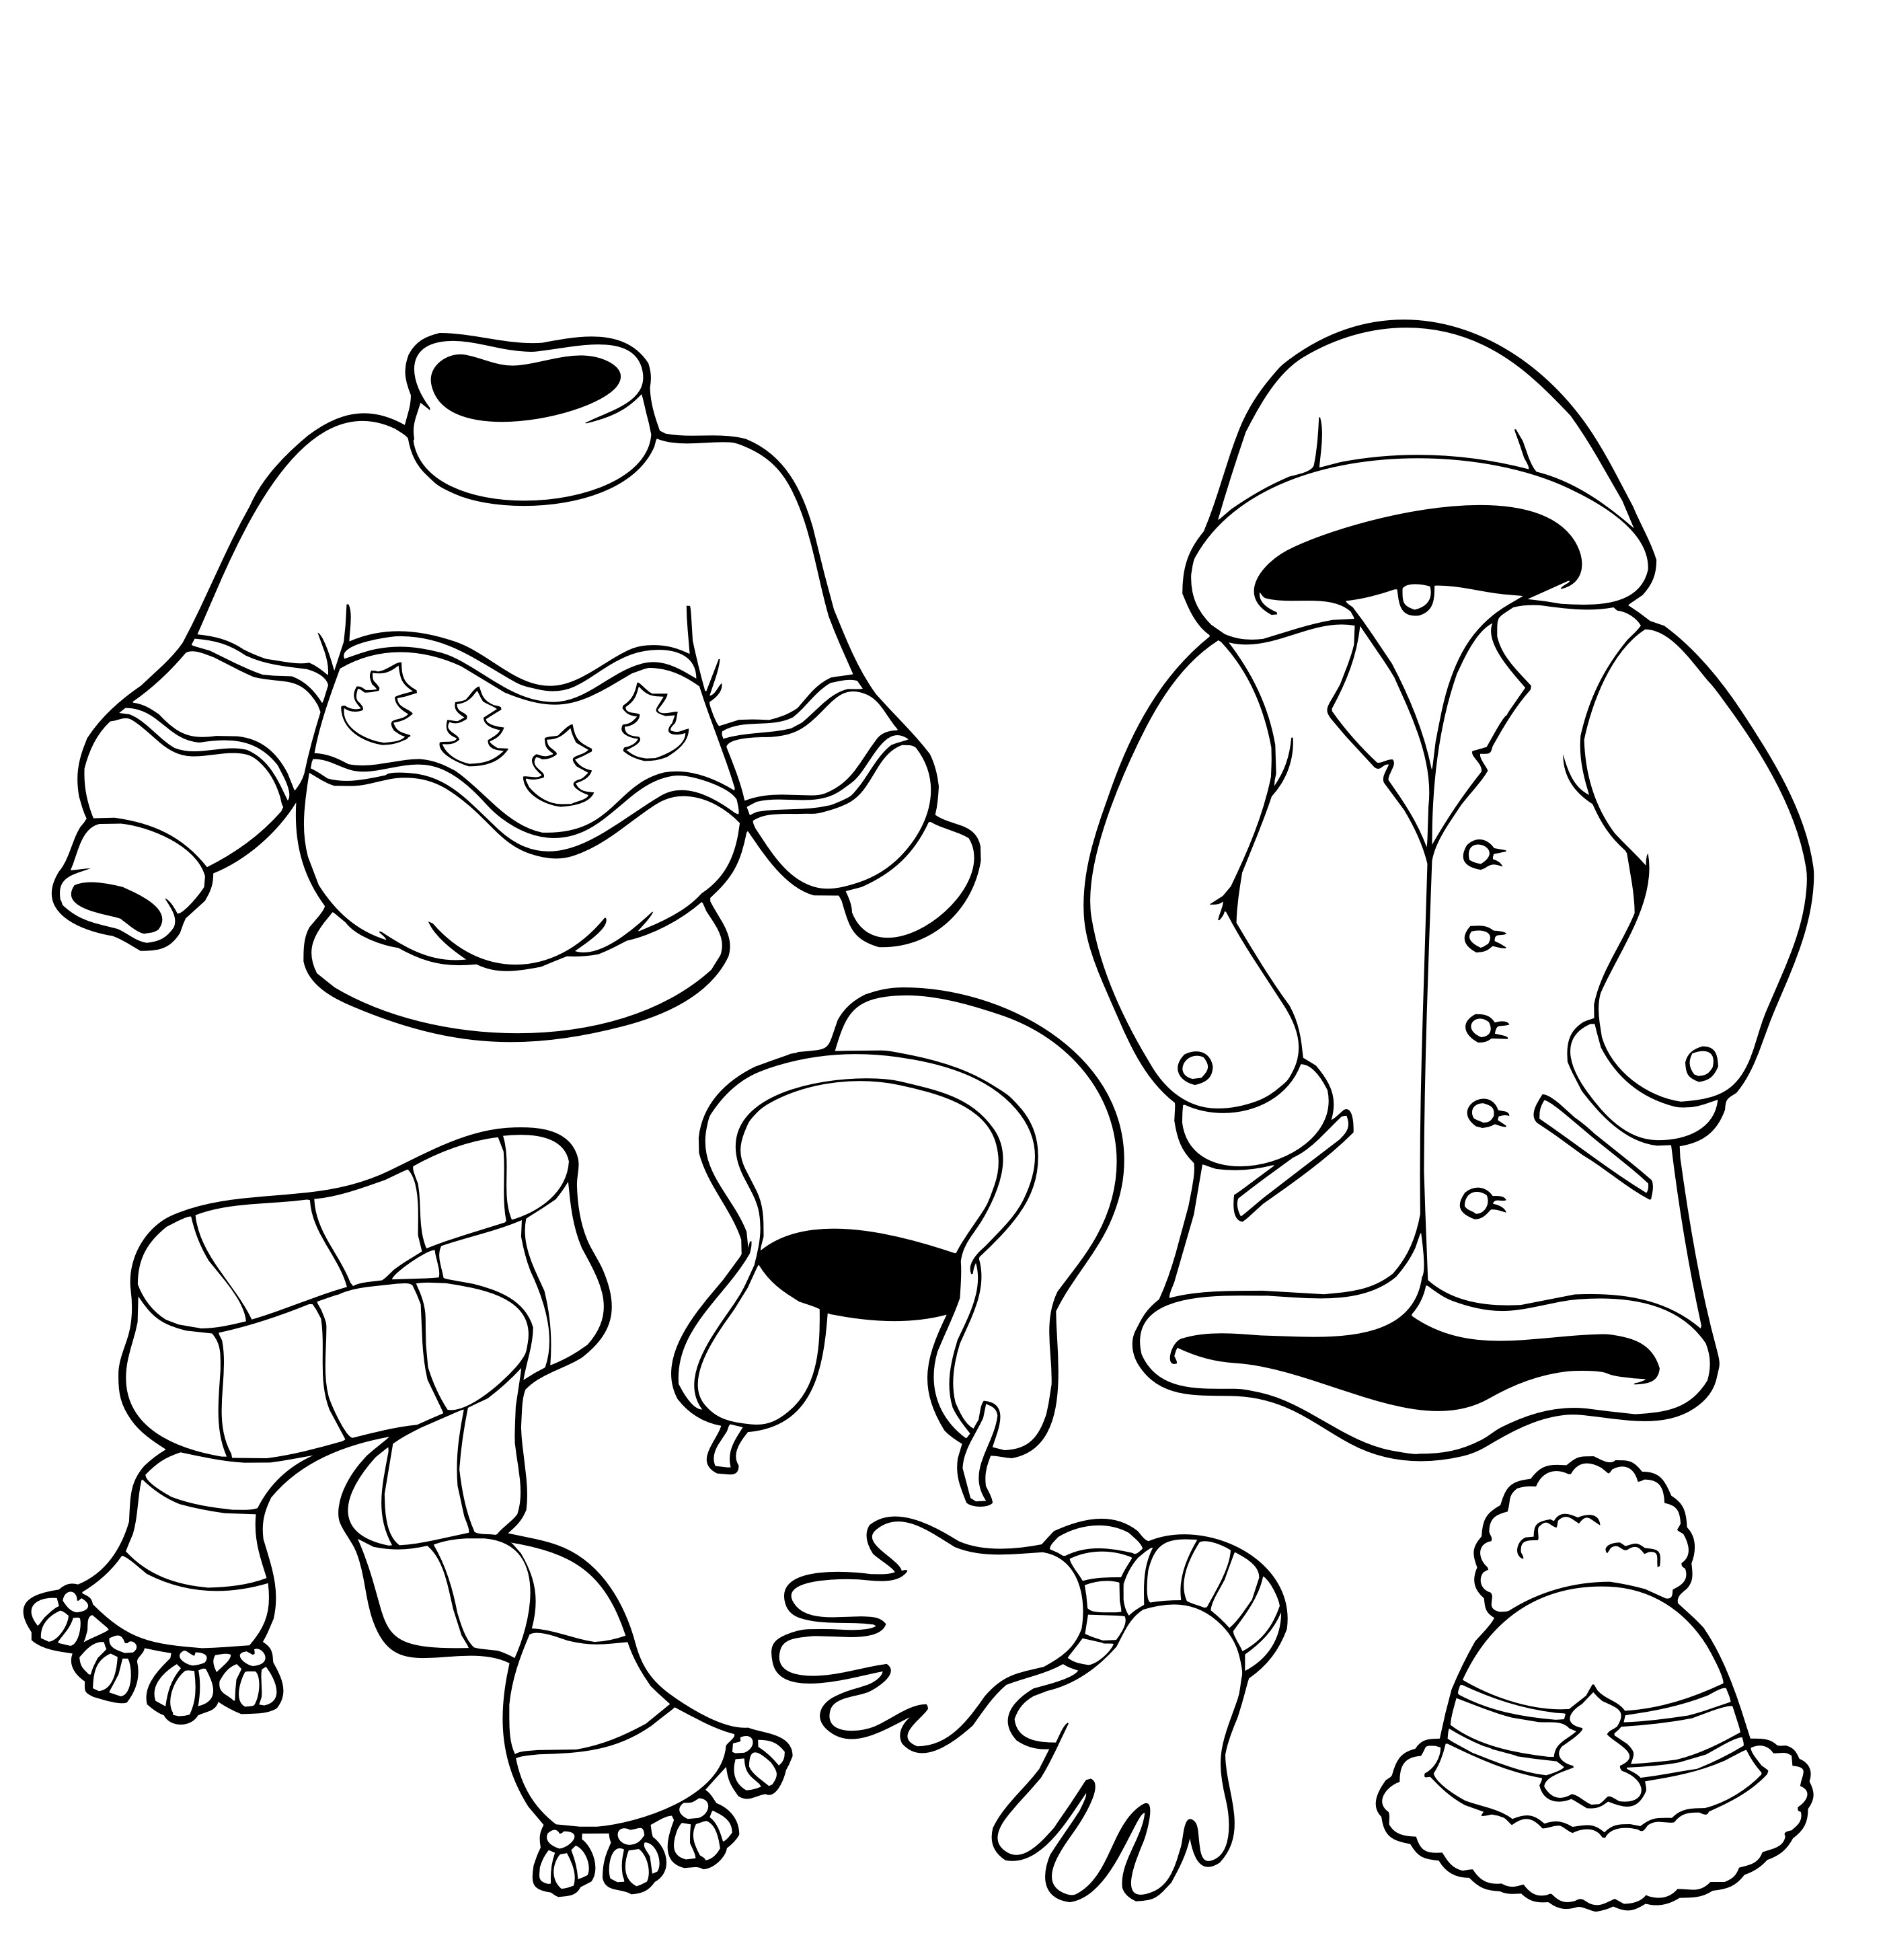  All clothes outside Winter Coloring Pages | coloring pages for kids |